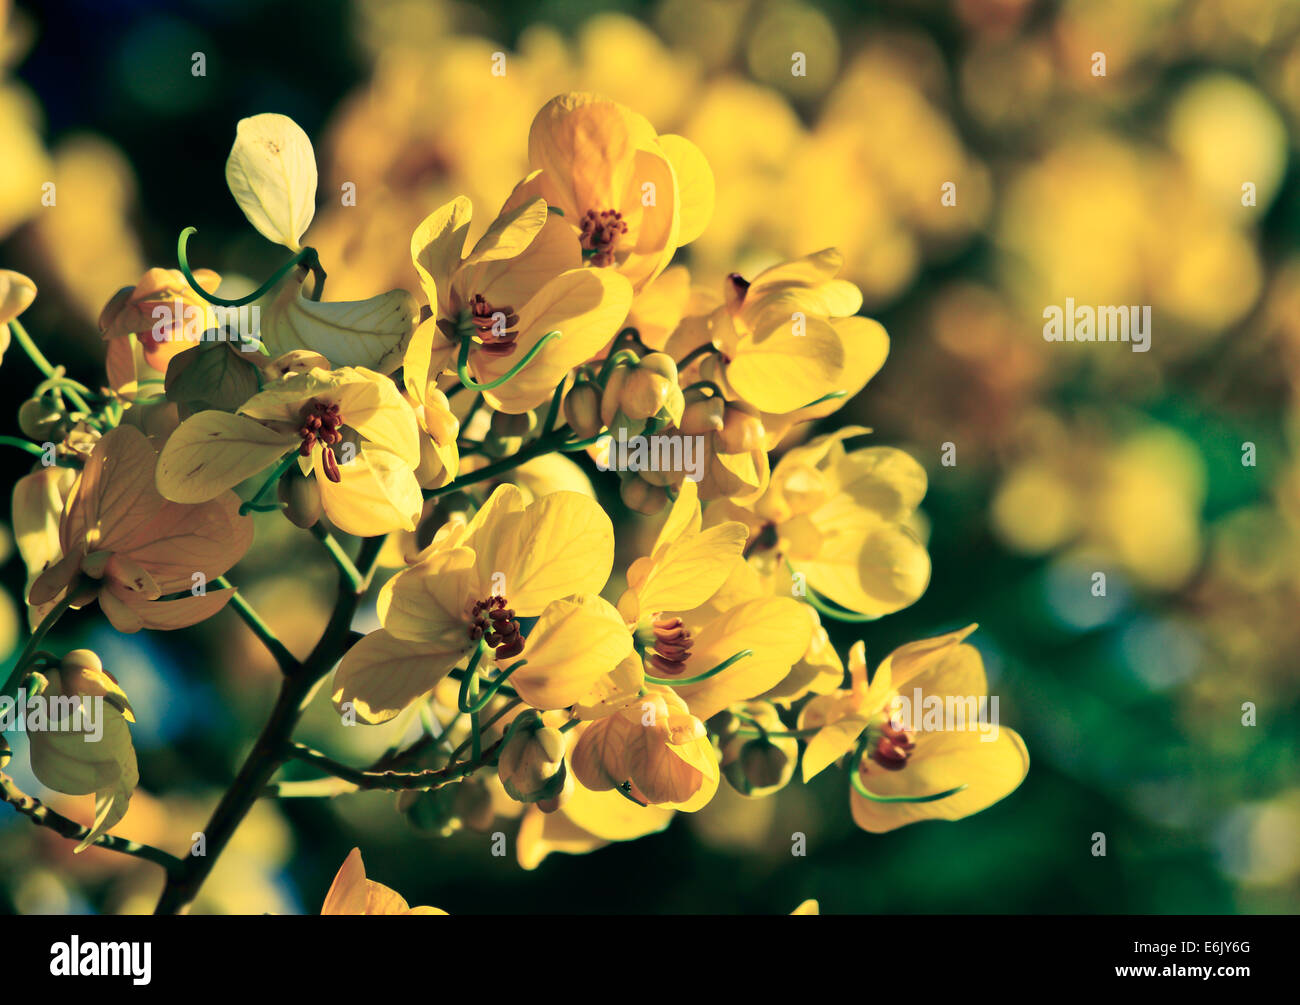 closeup of  yellow  flowers  on tree (Senna siamea Lam)  with vintage filter ; blur  background Stock Photo